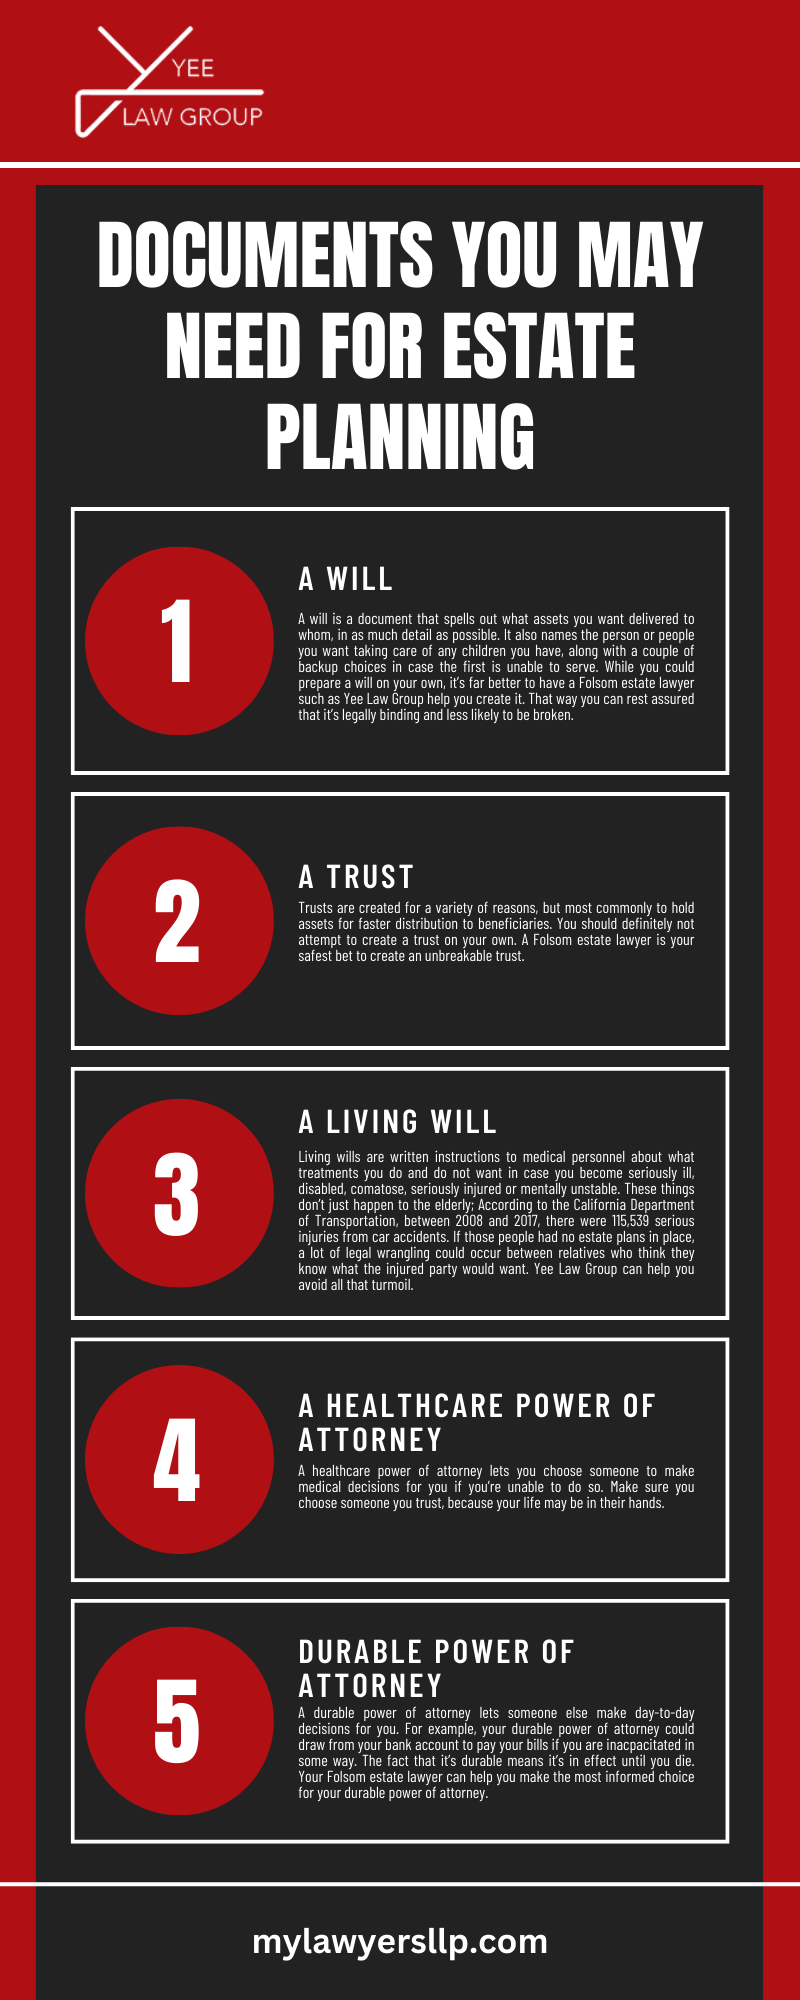 DOCUMENTS YOU MAY NEED FOR ESTATE PLANNING INFOGRAPHIC